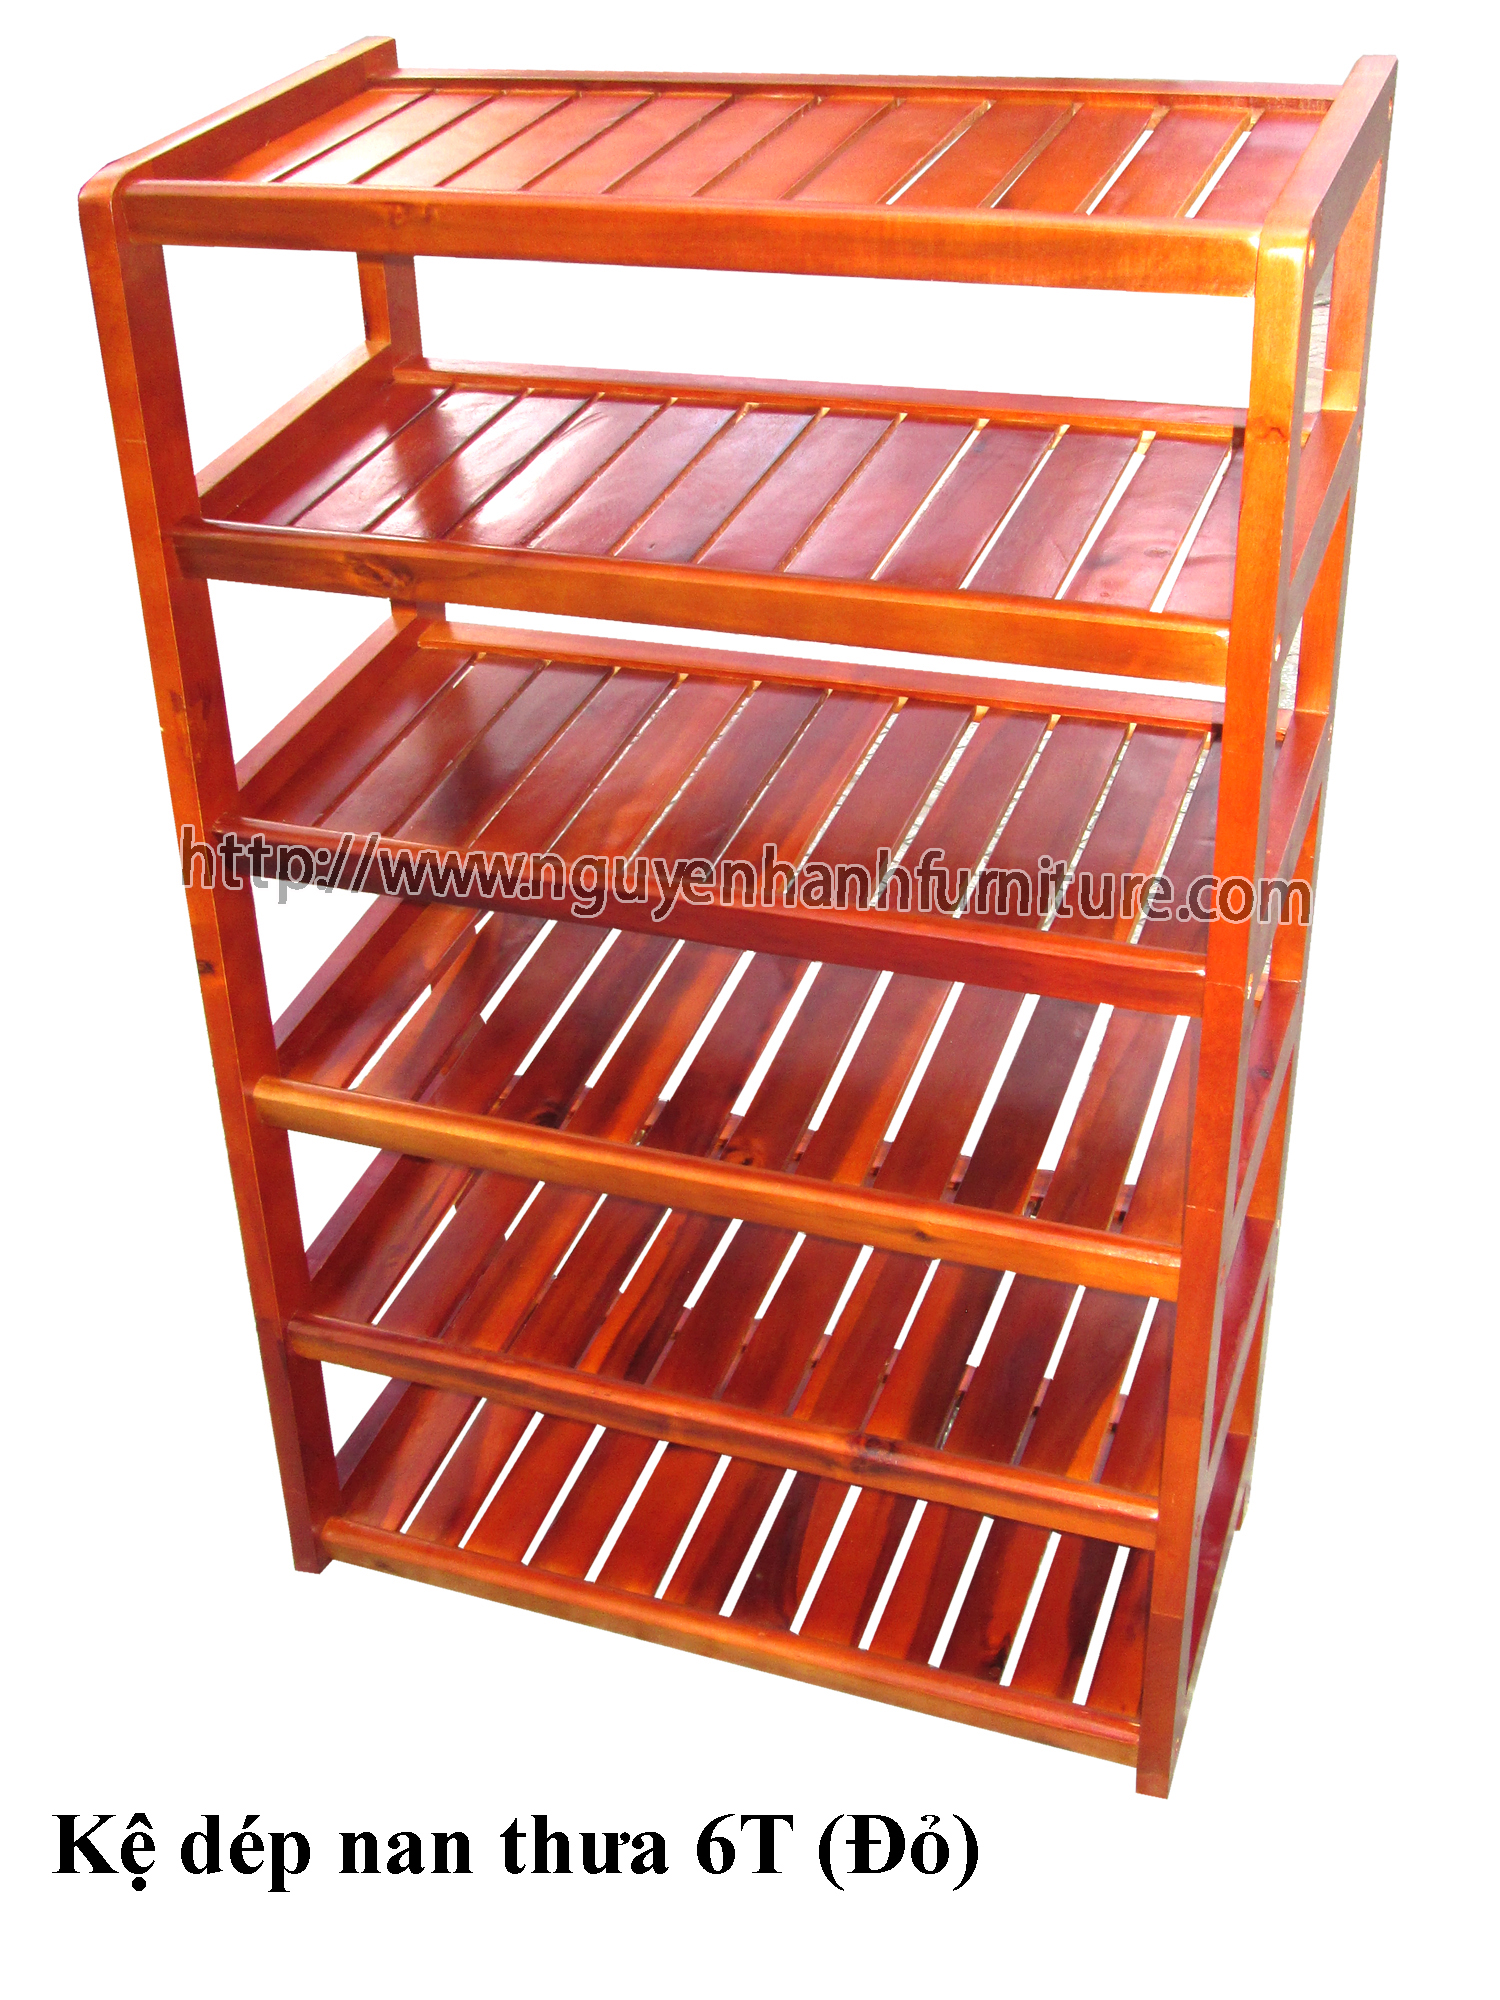 Name product: 6 storey Shoeshelf with sparse blades (Red) - Dimensions: 62 x 30 x 98 (H) - Description: Wood natural rubber